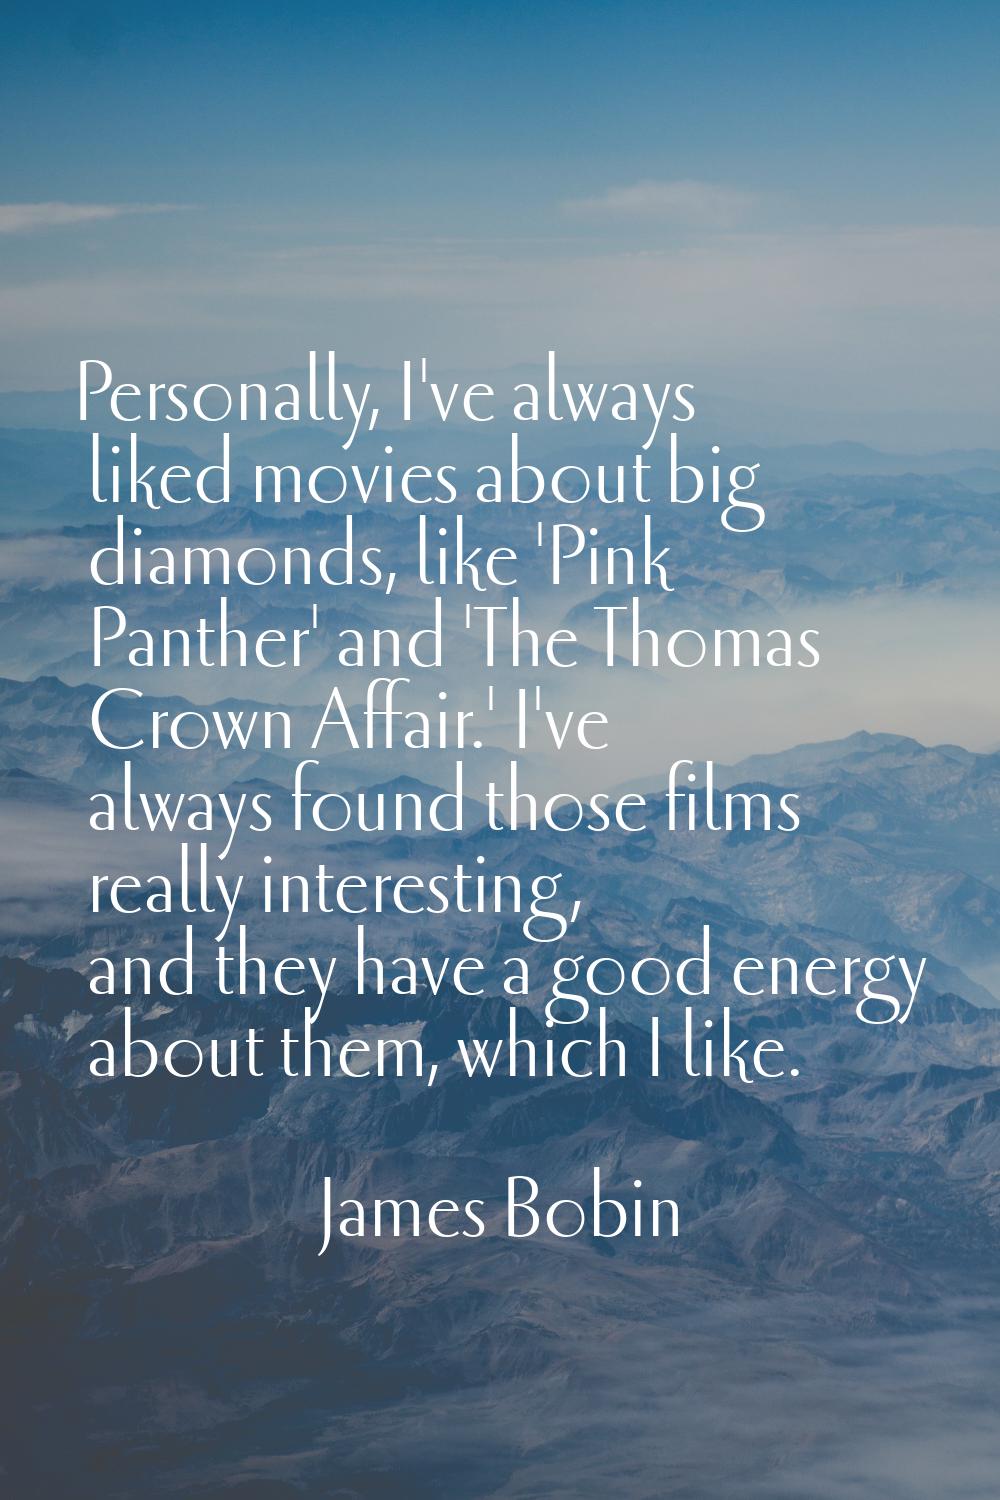 Personally, I've always liked movies about big diamonds, like 'Pink Panther' and 'The Thomas Crown 